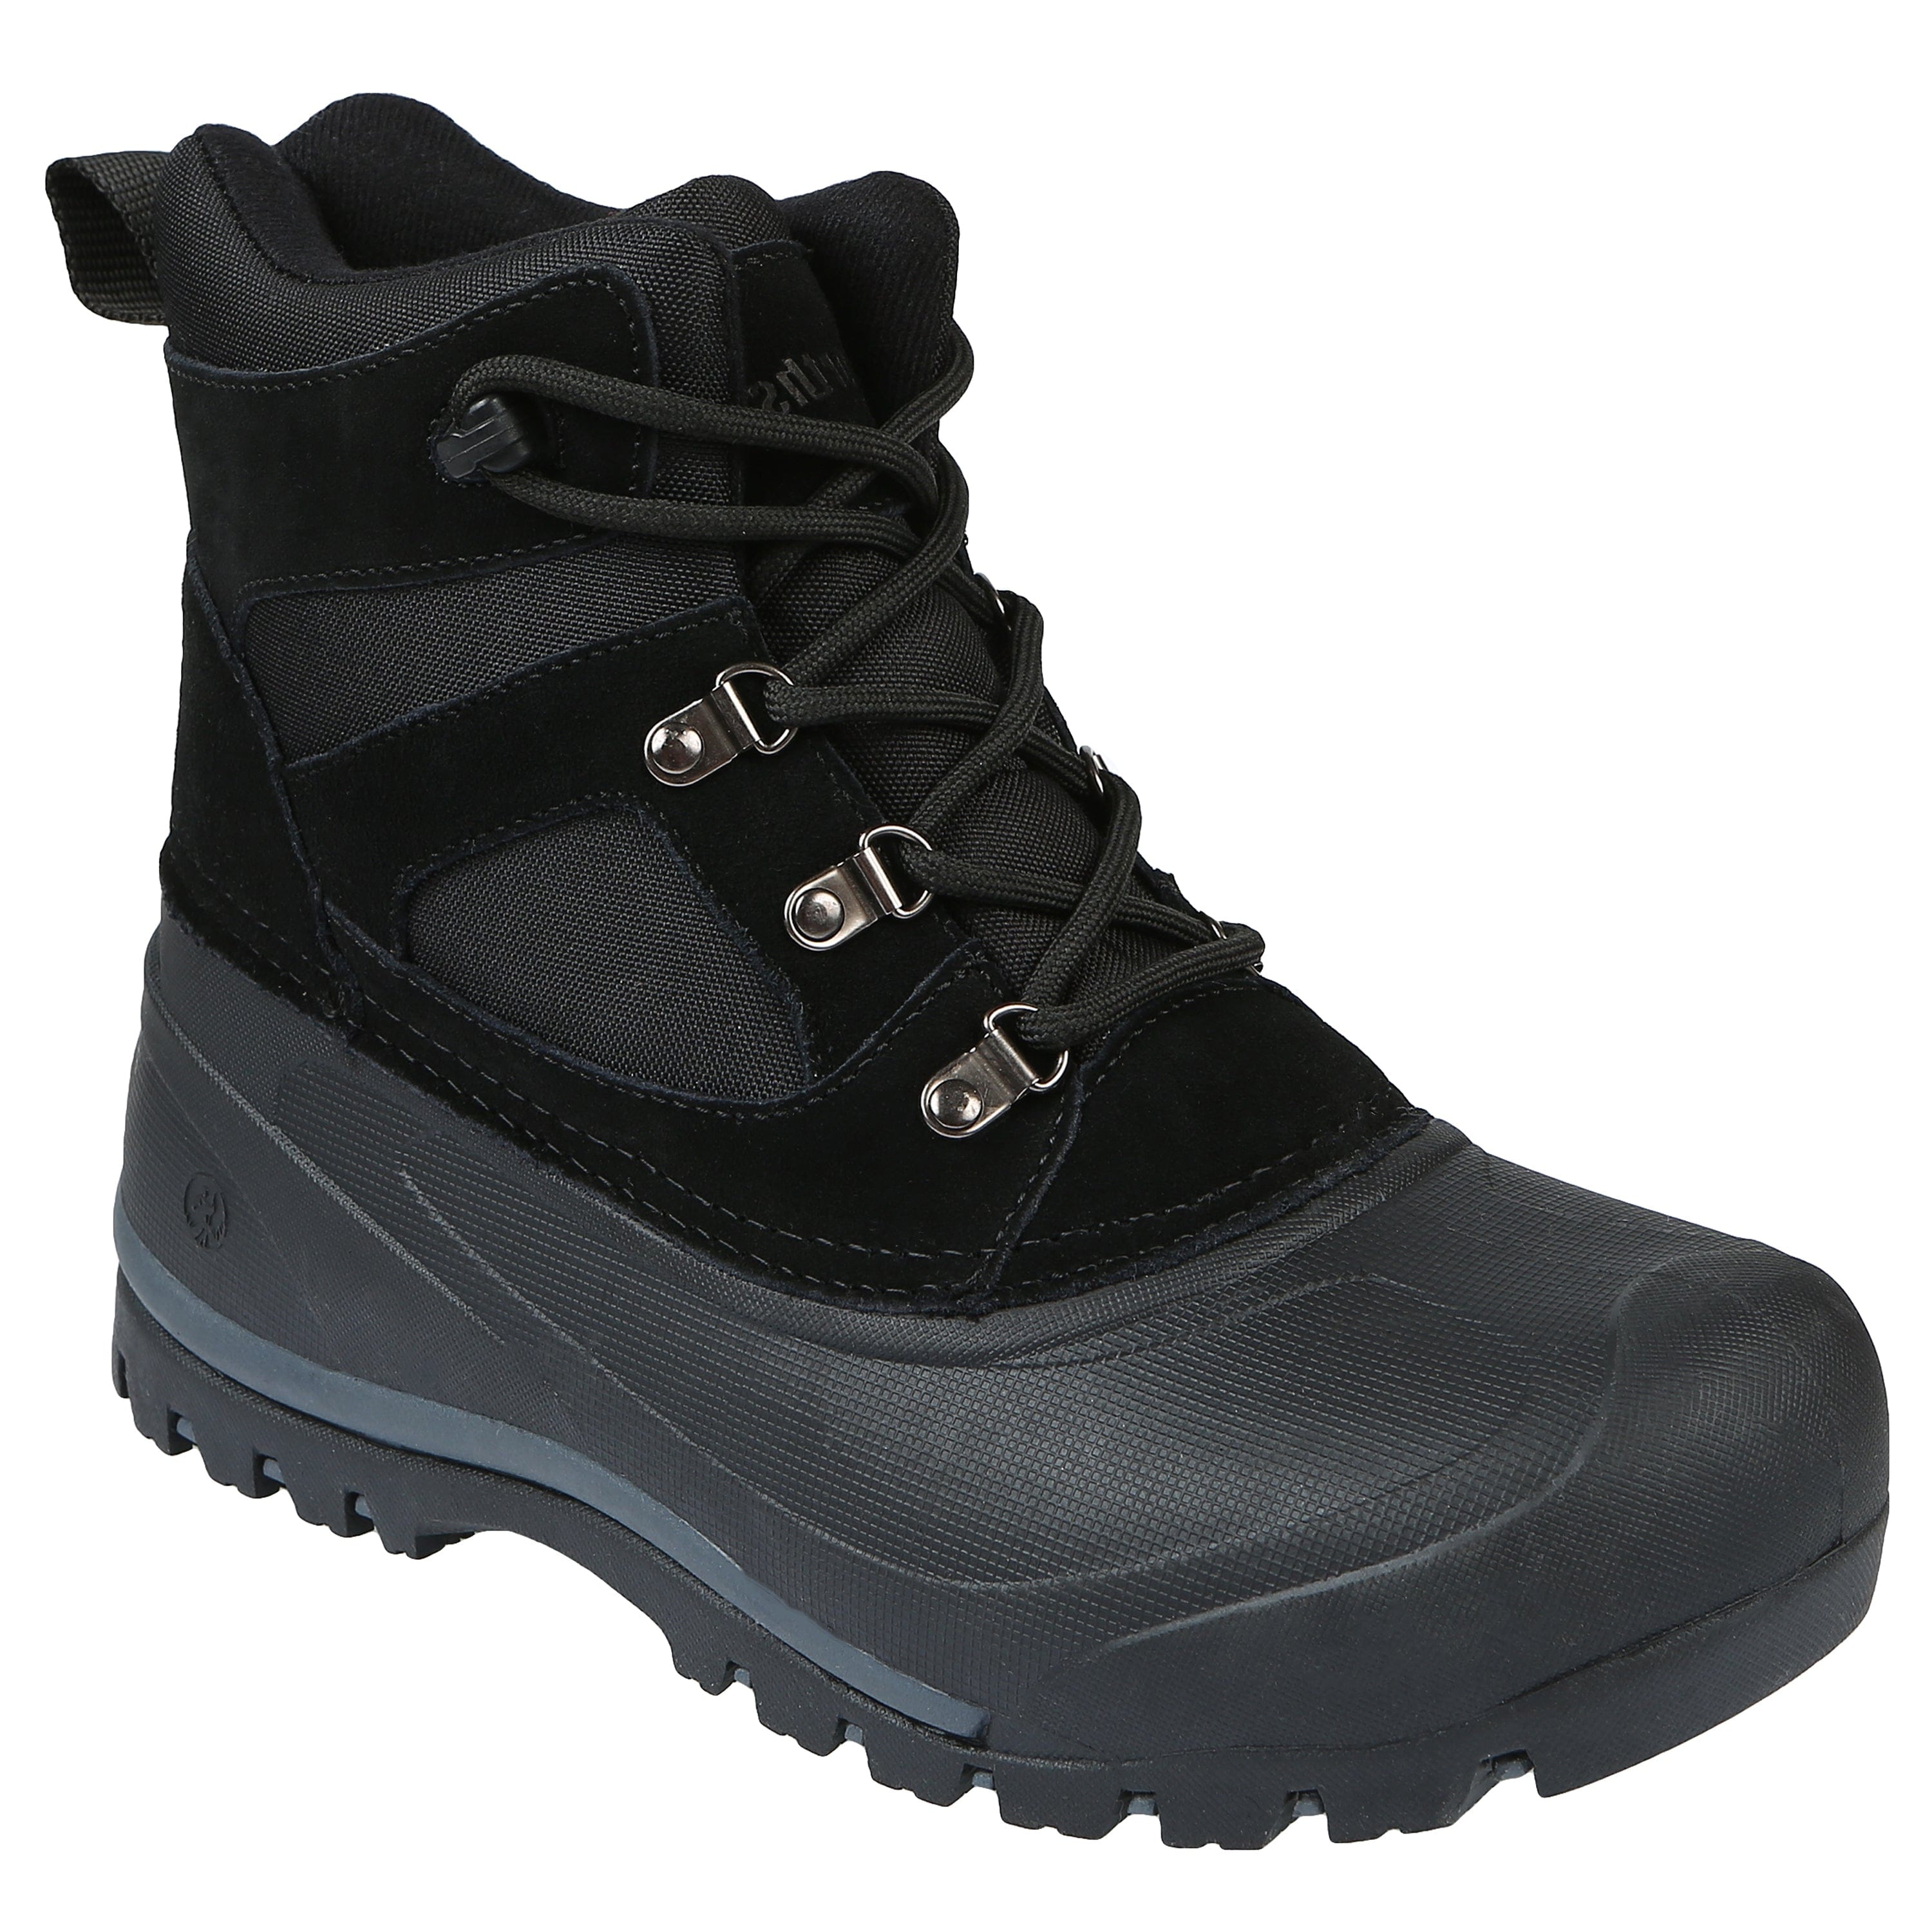 Men's Tundra Insulated Winter Snow Boot - Northside USA